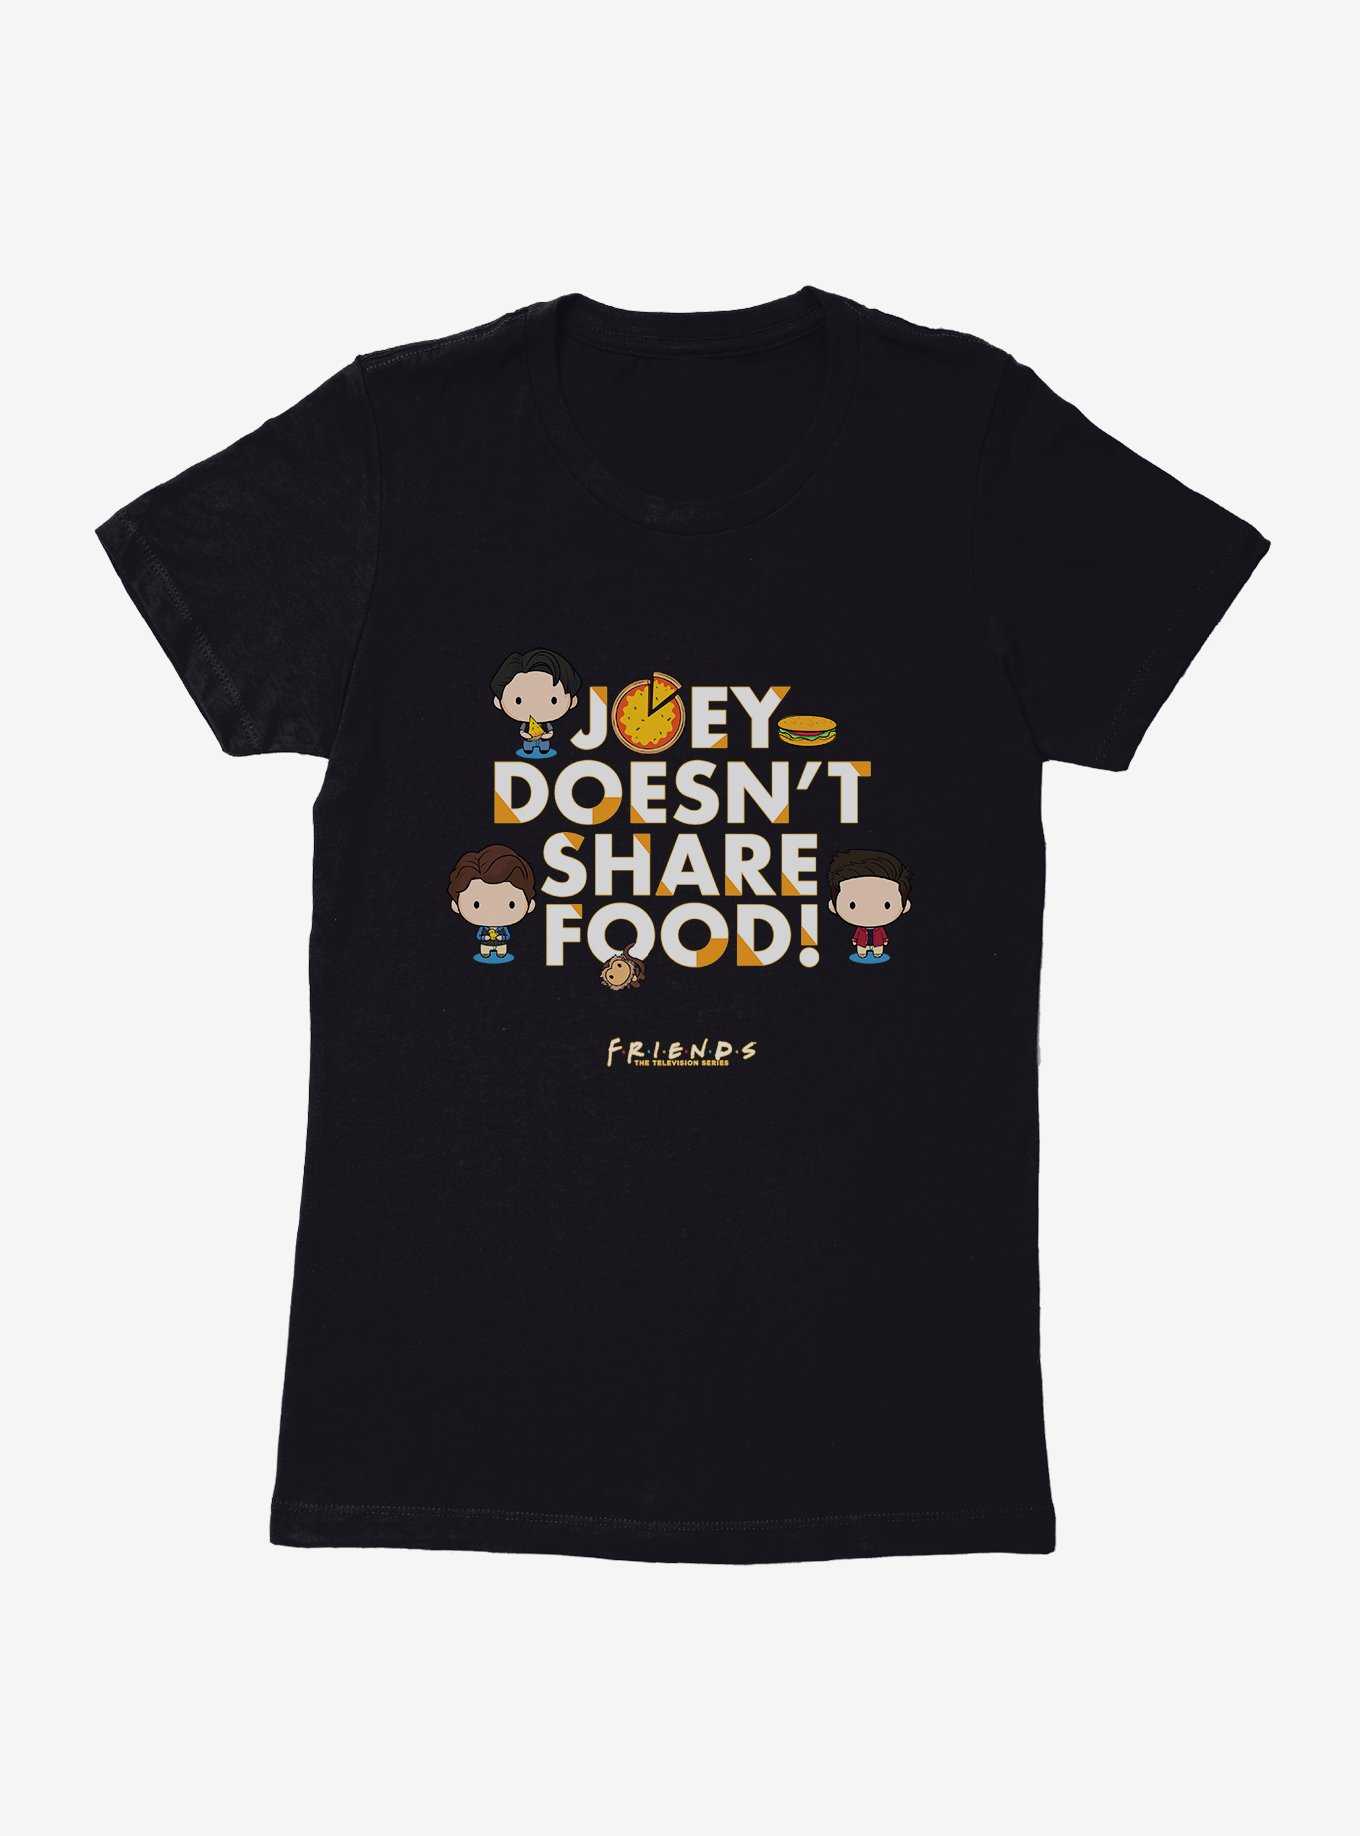 Friends Chibi Joey Doesn't Share Food Womens T-Shirt, , hi-res